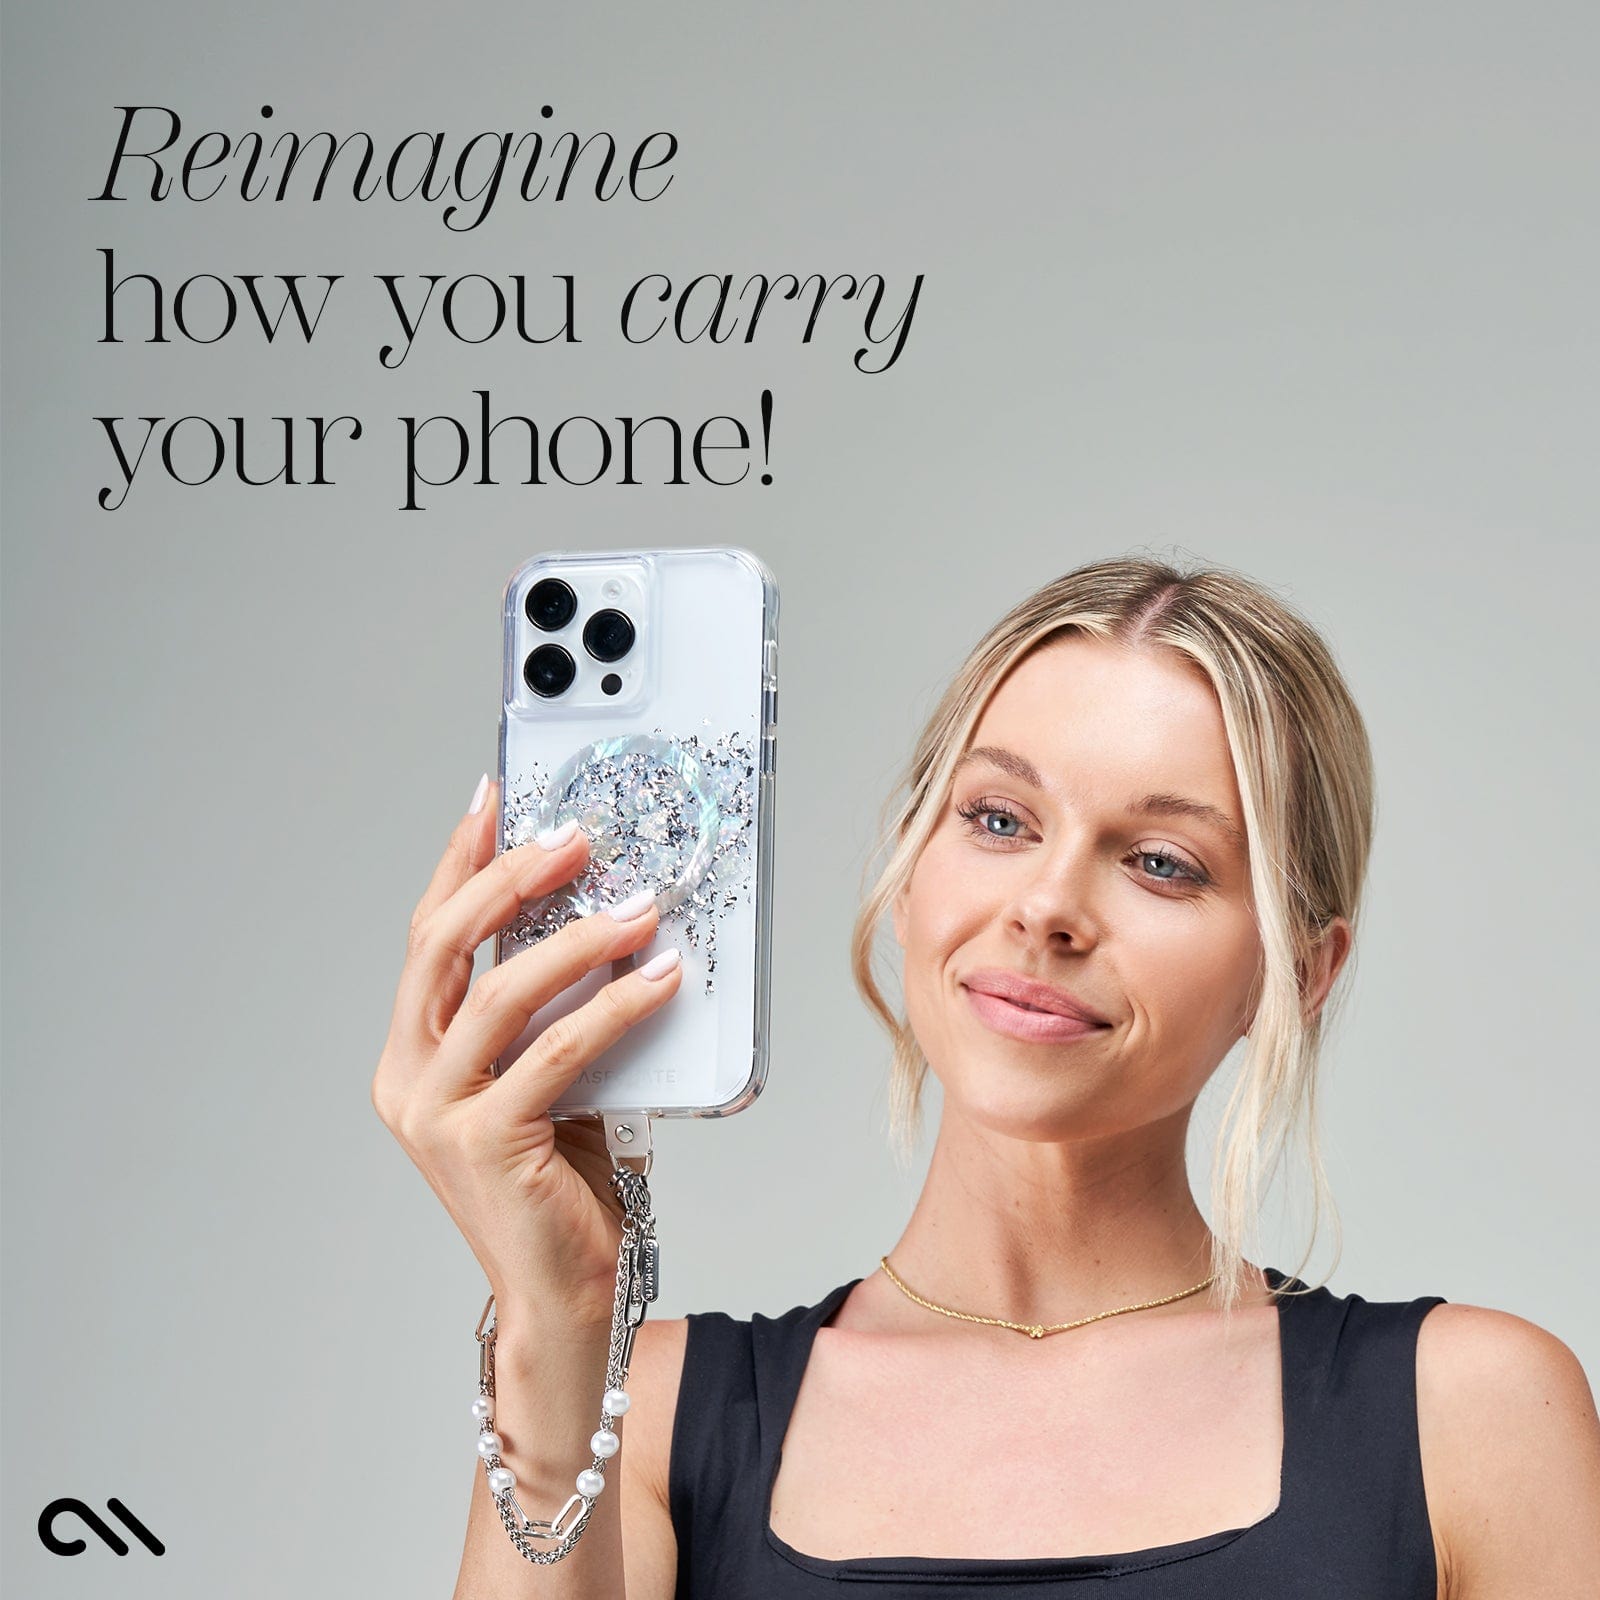 REIMAGINE HOW YOU CARRY YOUR PHONE!